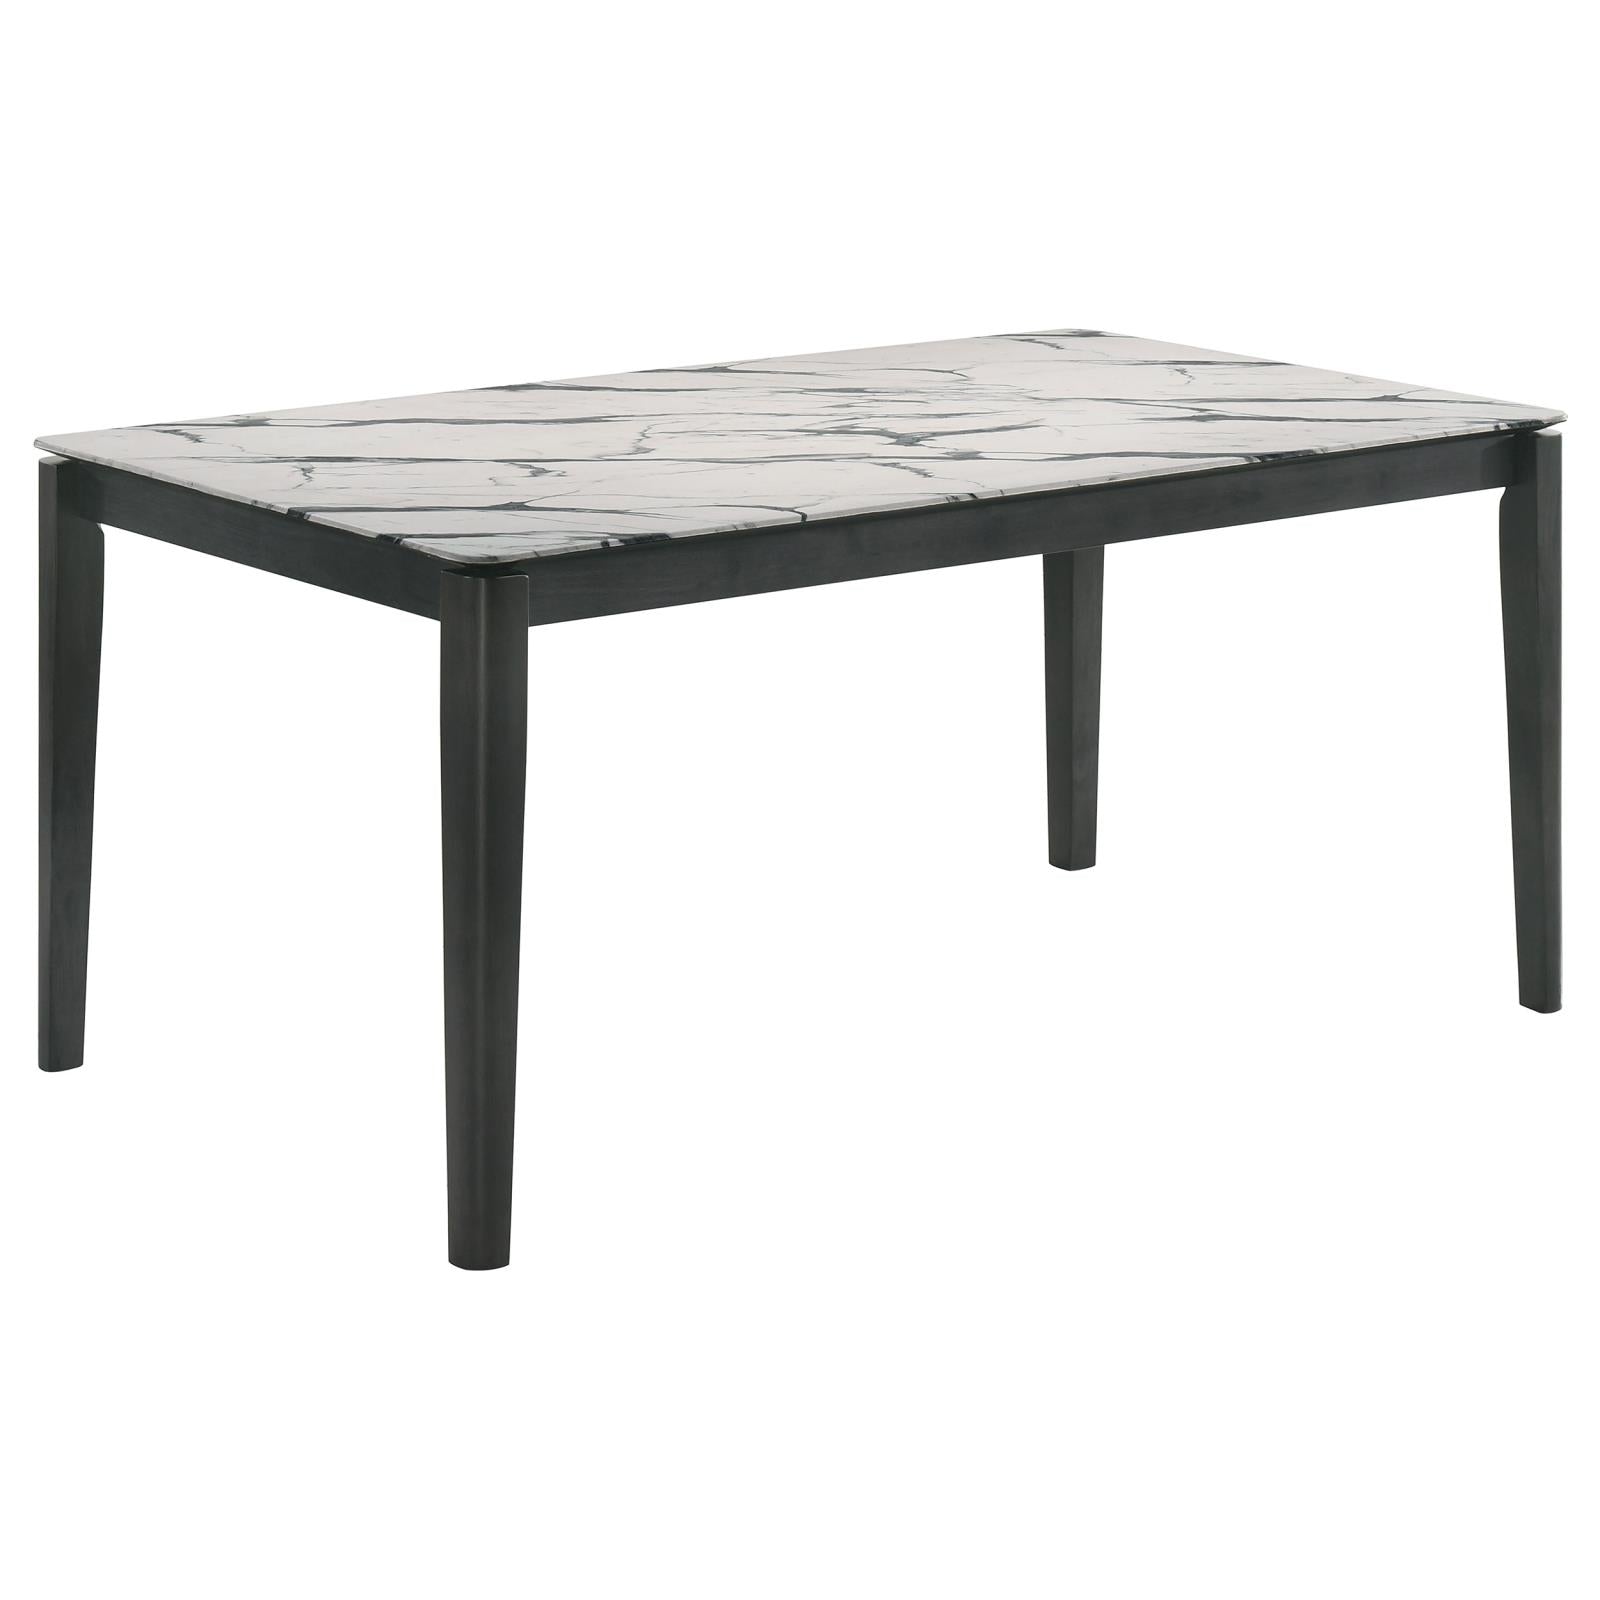 Stevie Rectangular Dining Table With Faux Marble Top 115111Wg